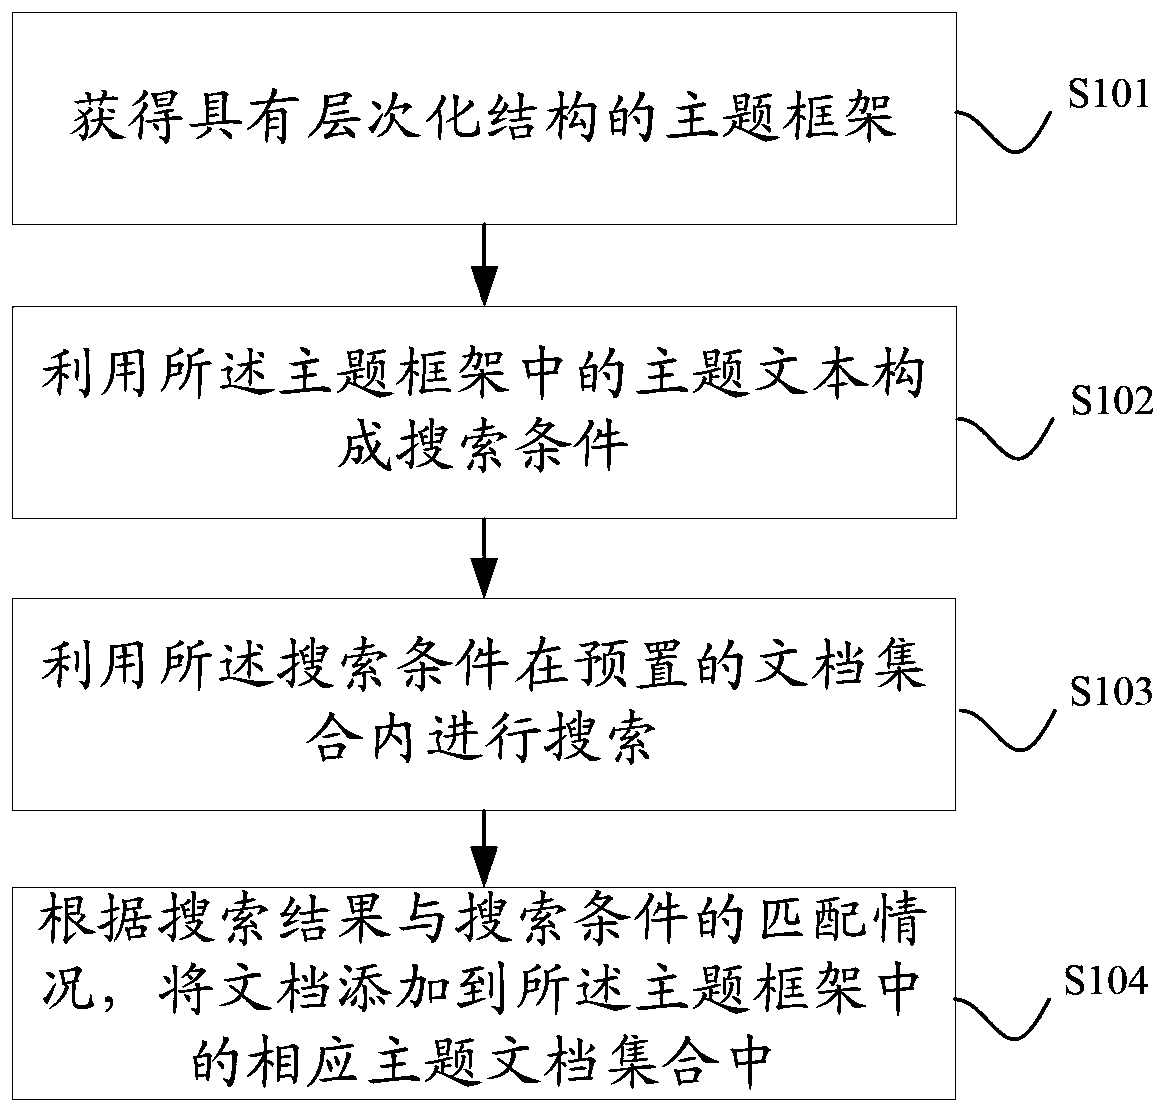 Method and device for structured document organization